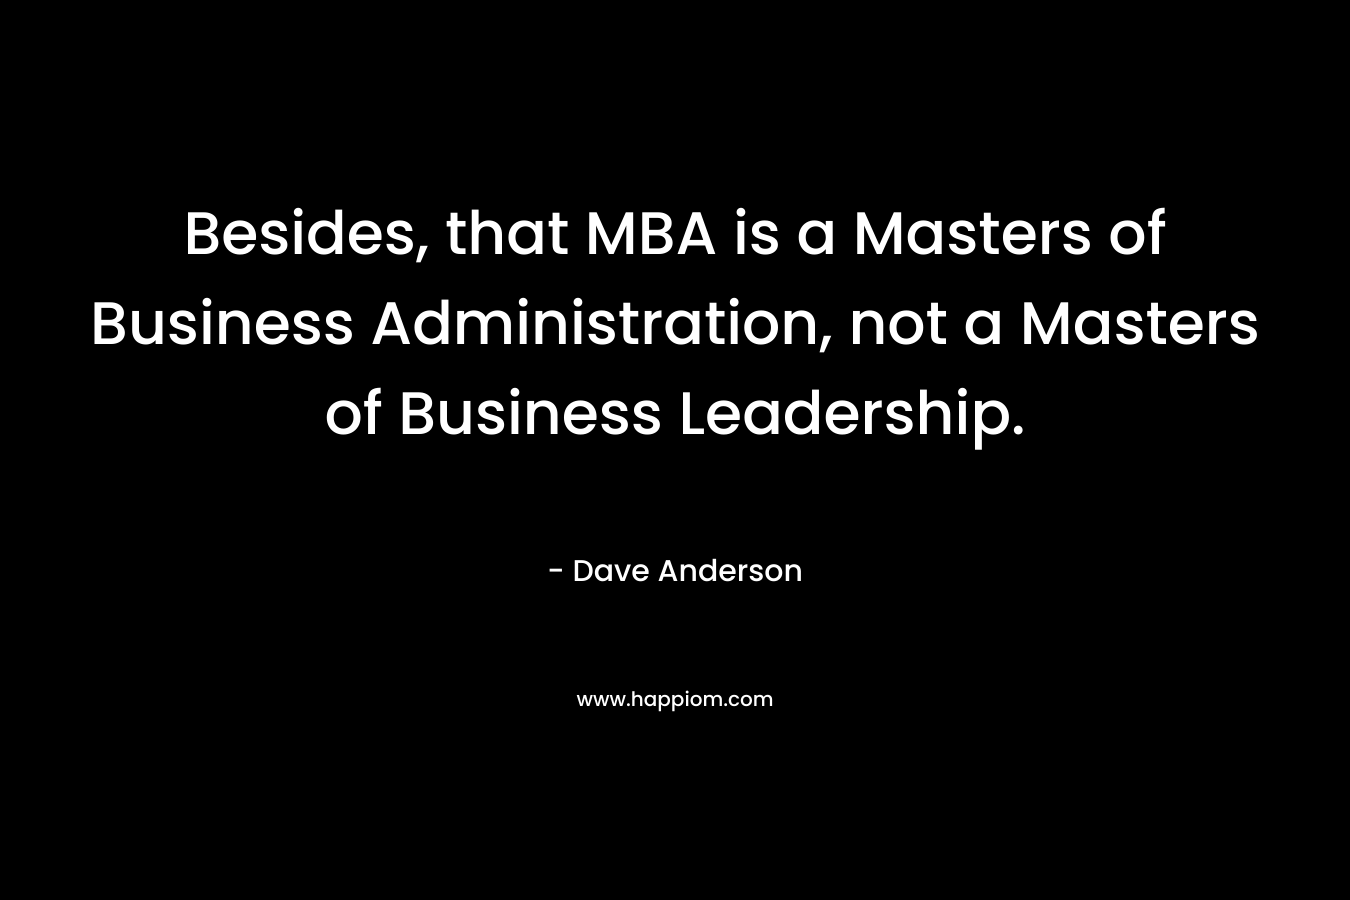 Besides, that MBA is a Masters of Business Administration, not a Masters of Business Leadership.